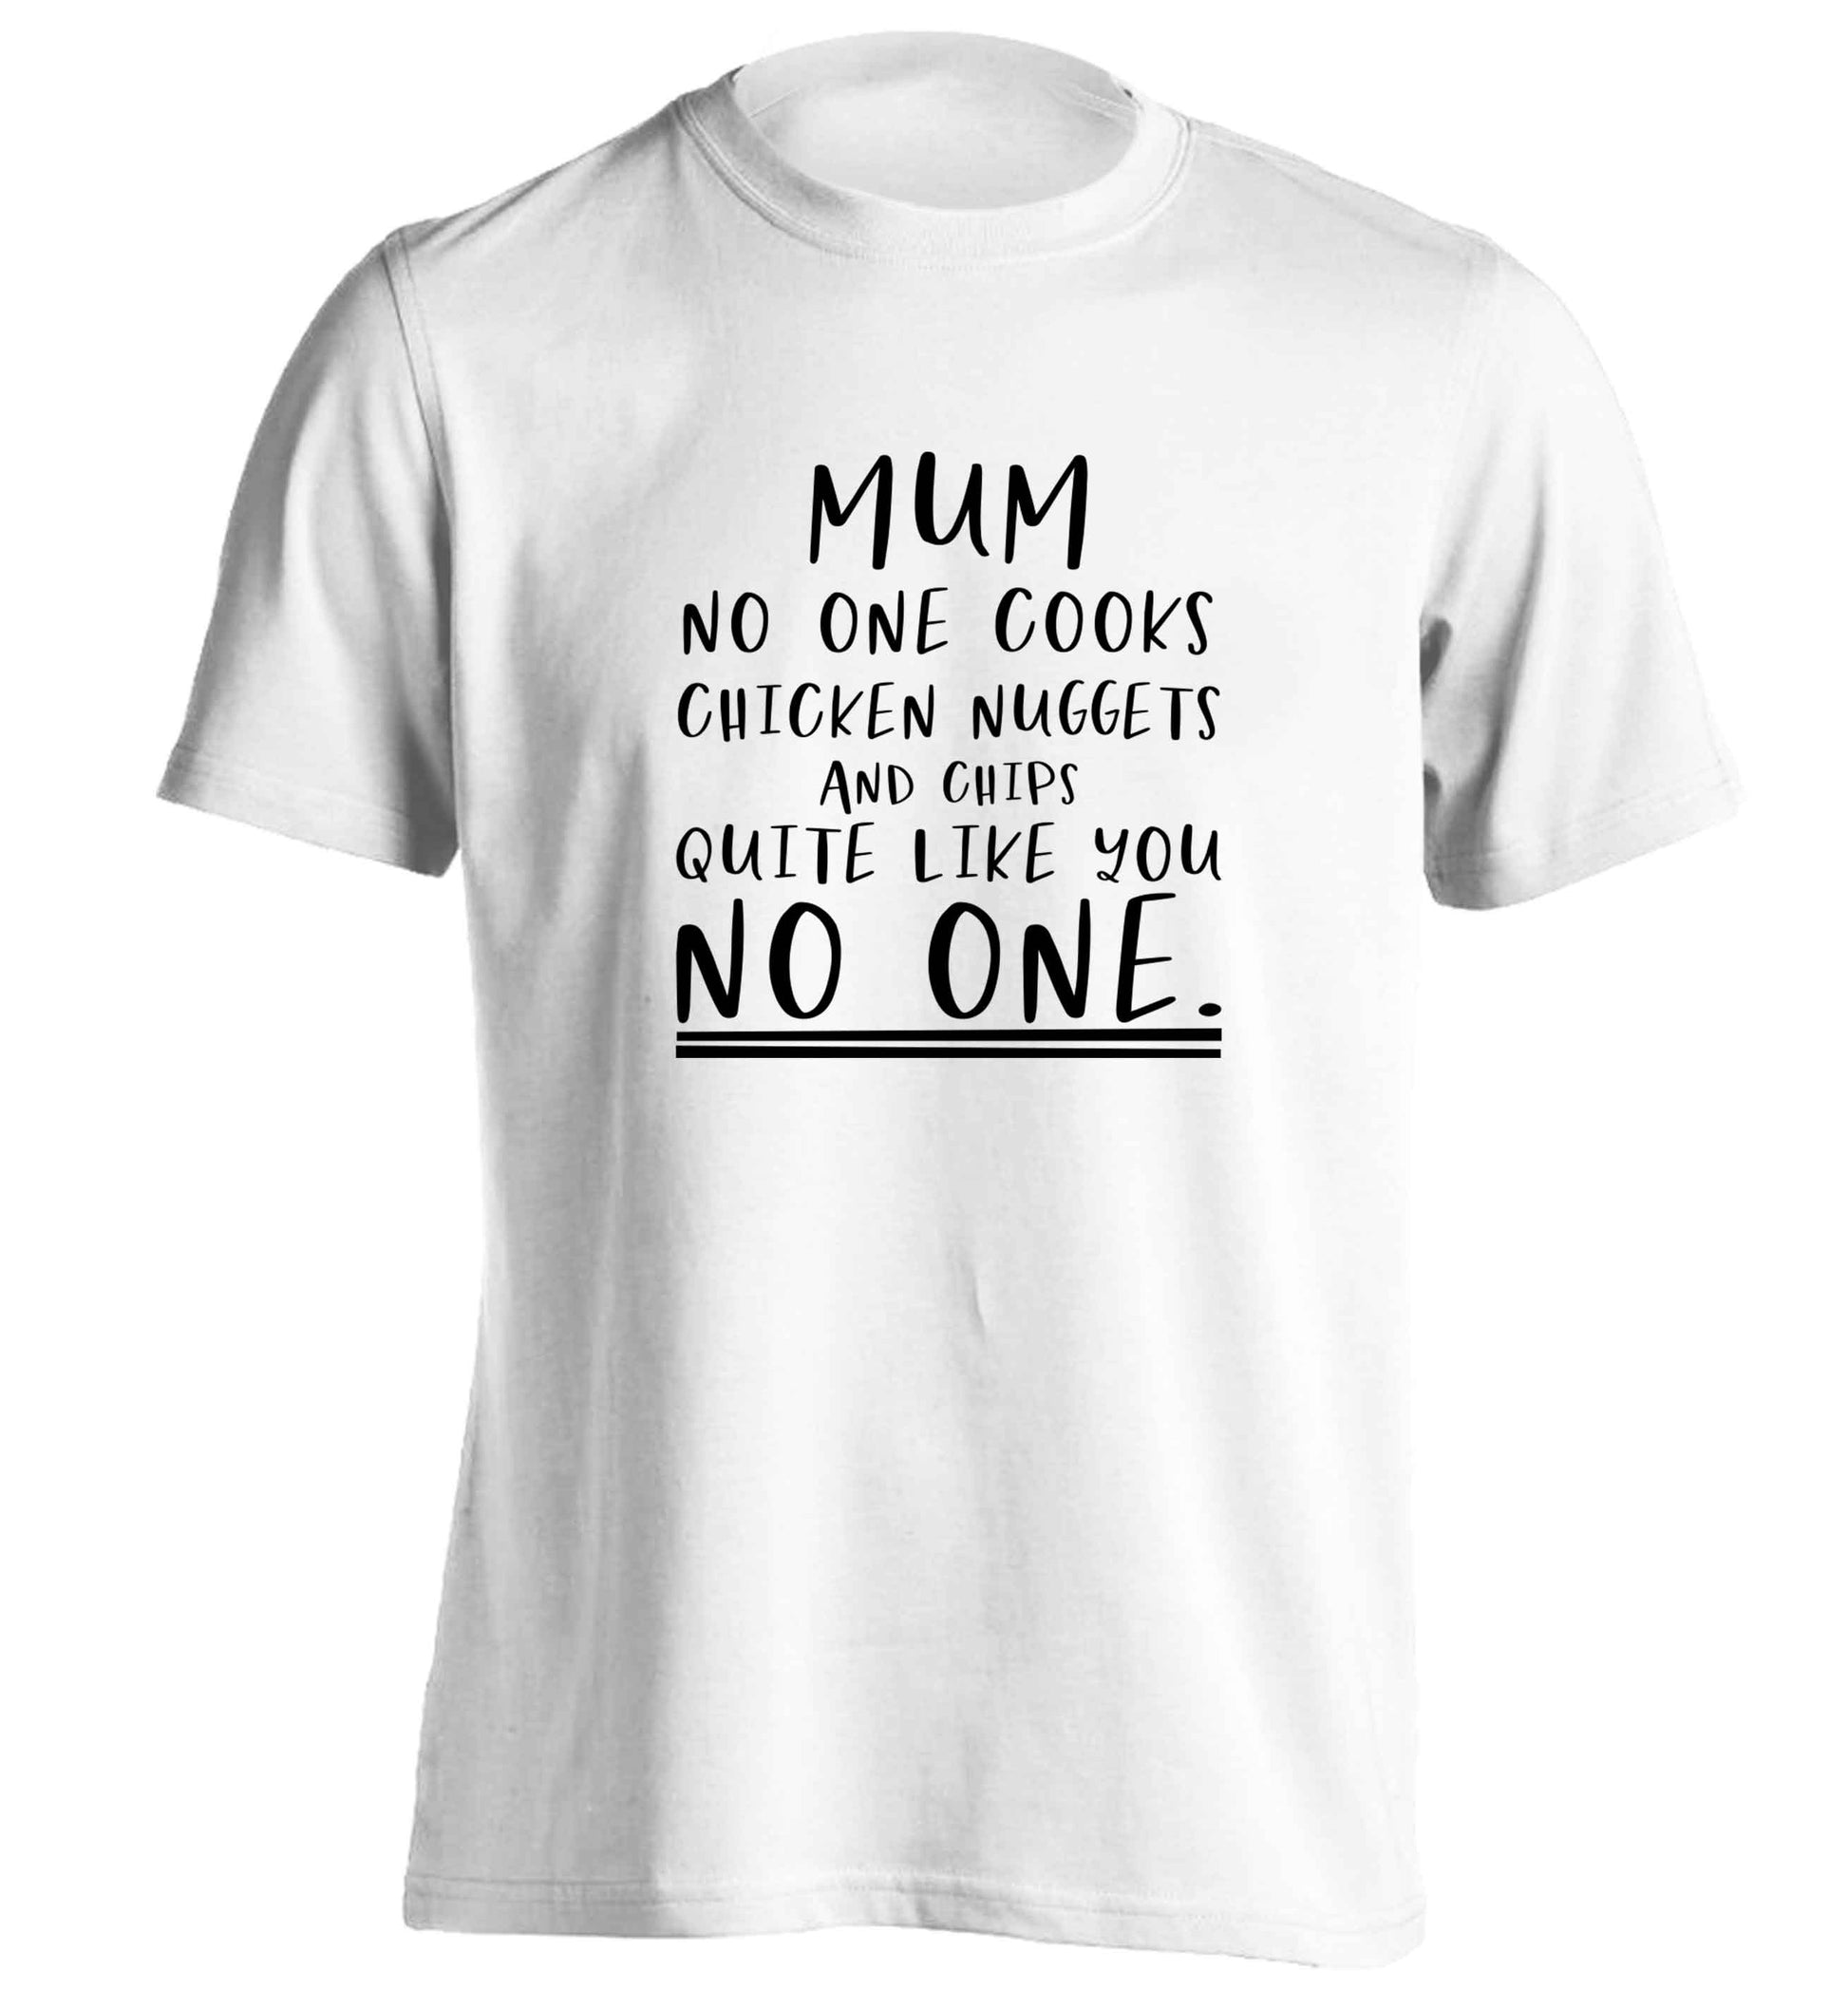 Super funny sassy gift for mother's day or birthday!  Mum no one cooks chicken nuggets and chips like you no one adults unisex white Tshirt 2XL